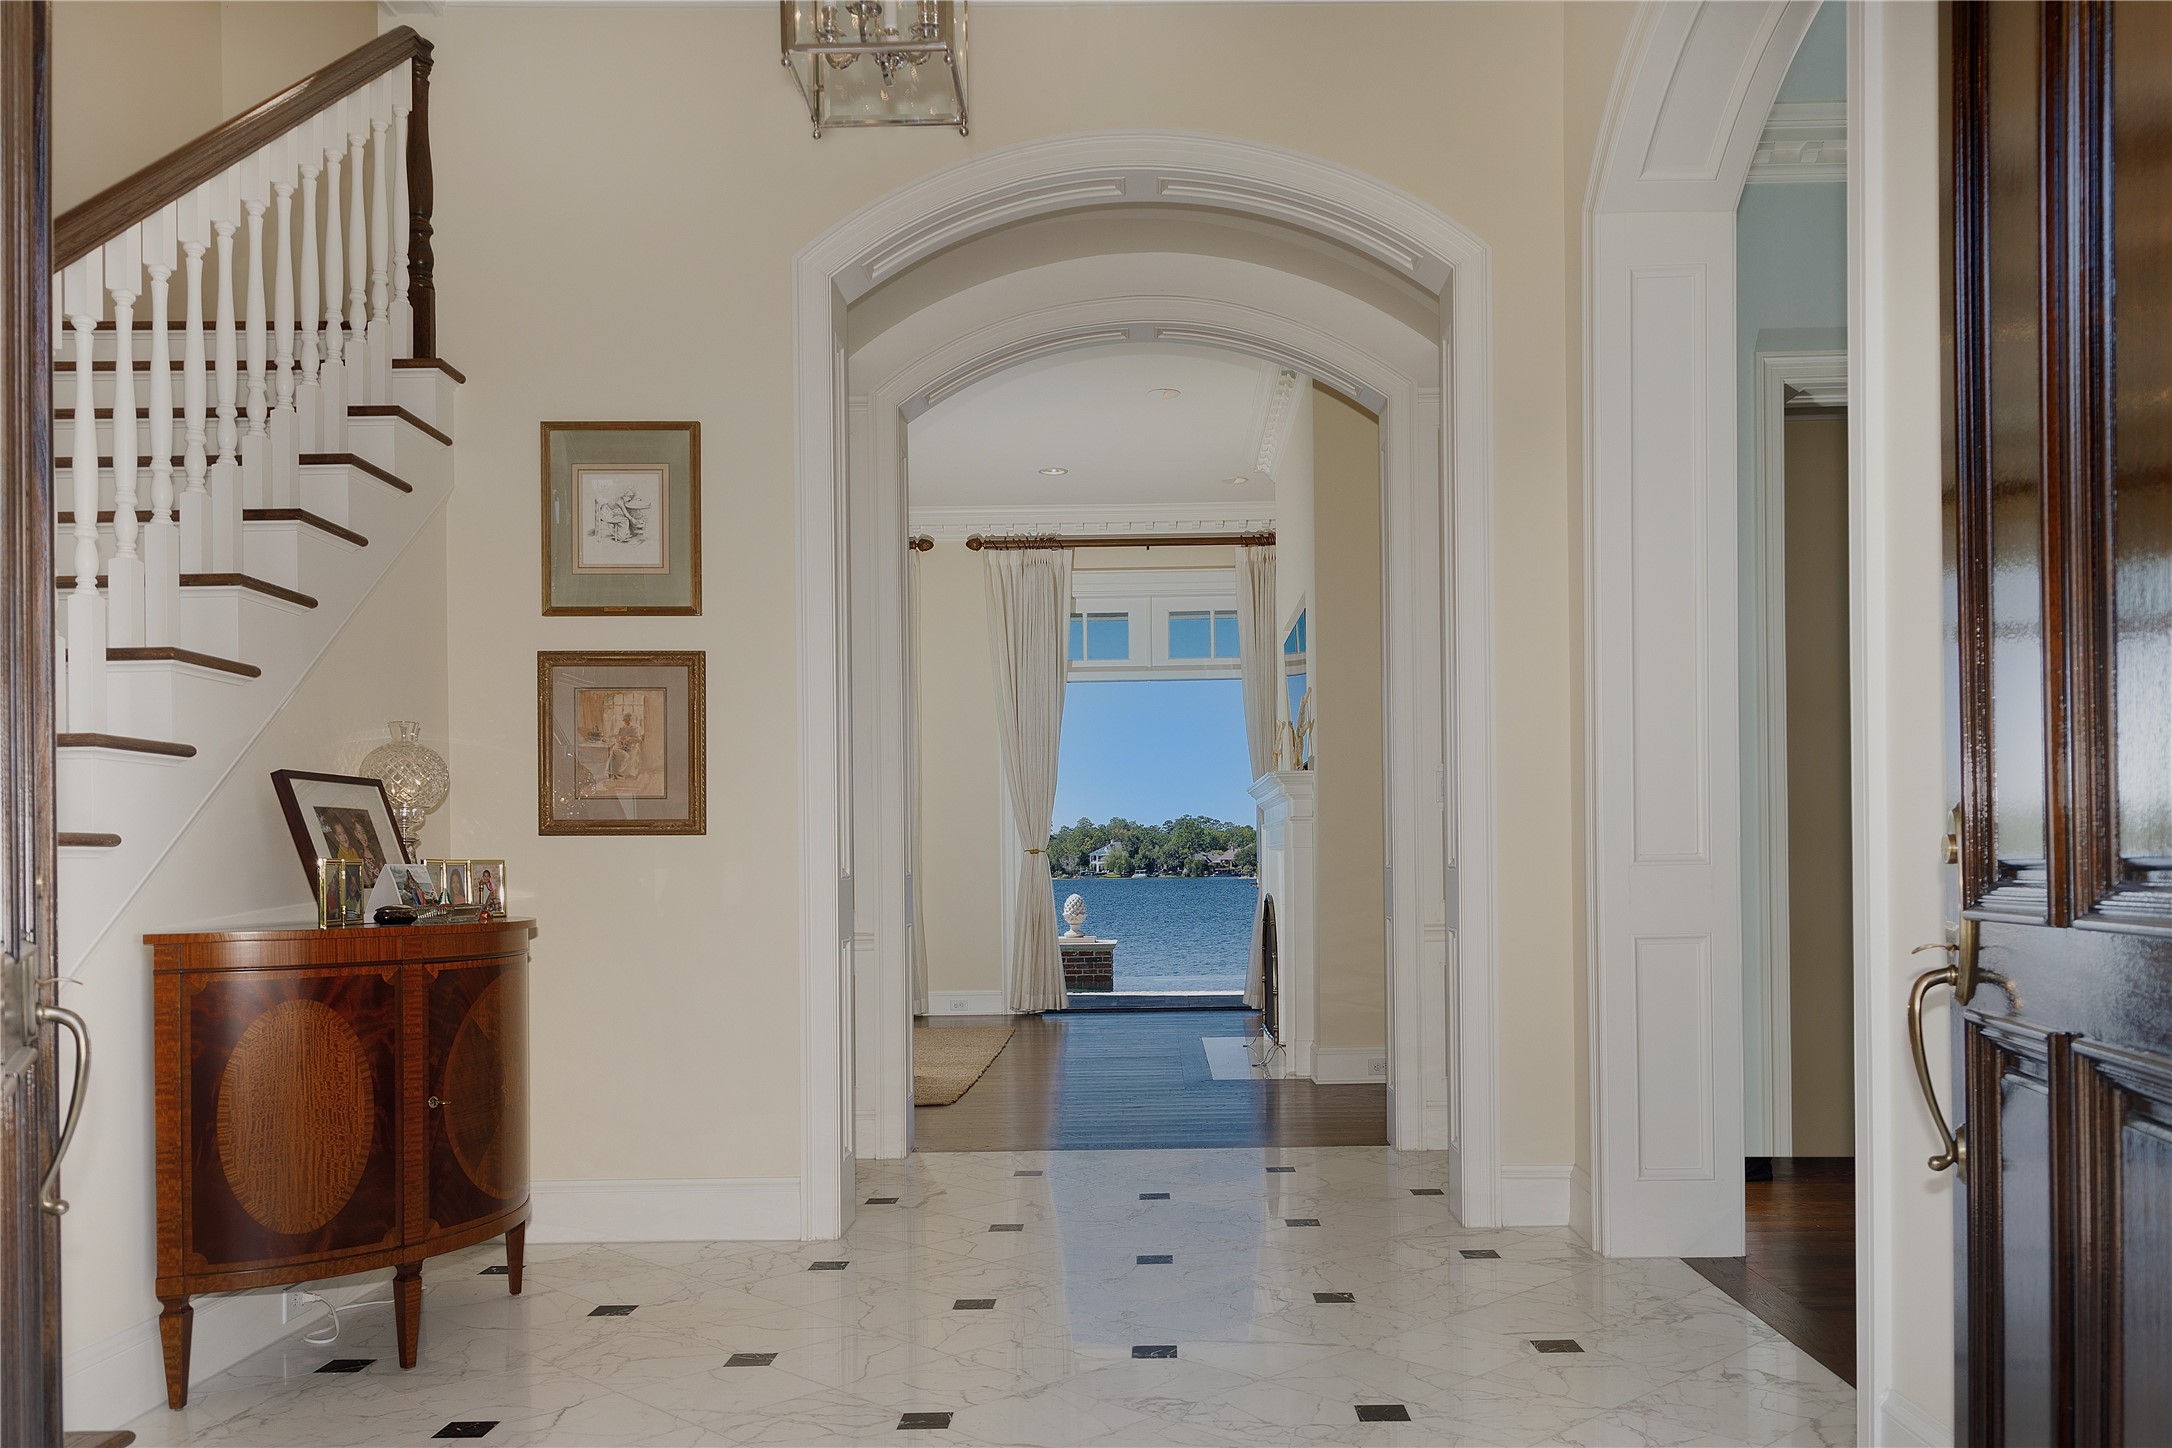 The lake view continues through the Calacatta Oro Marble foyer and the view is beautifully framed by paneled arches.